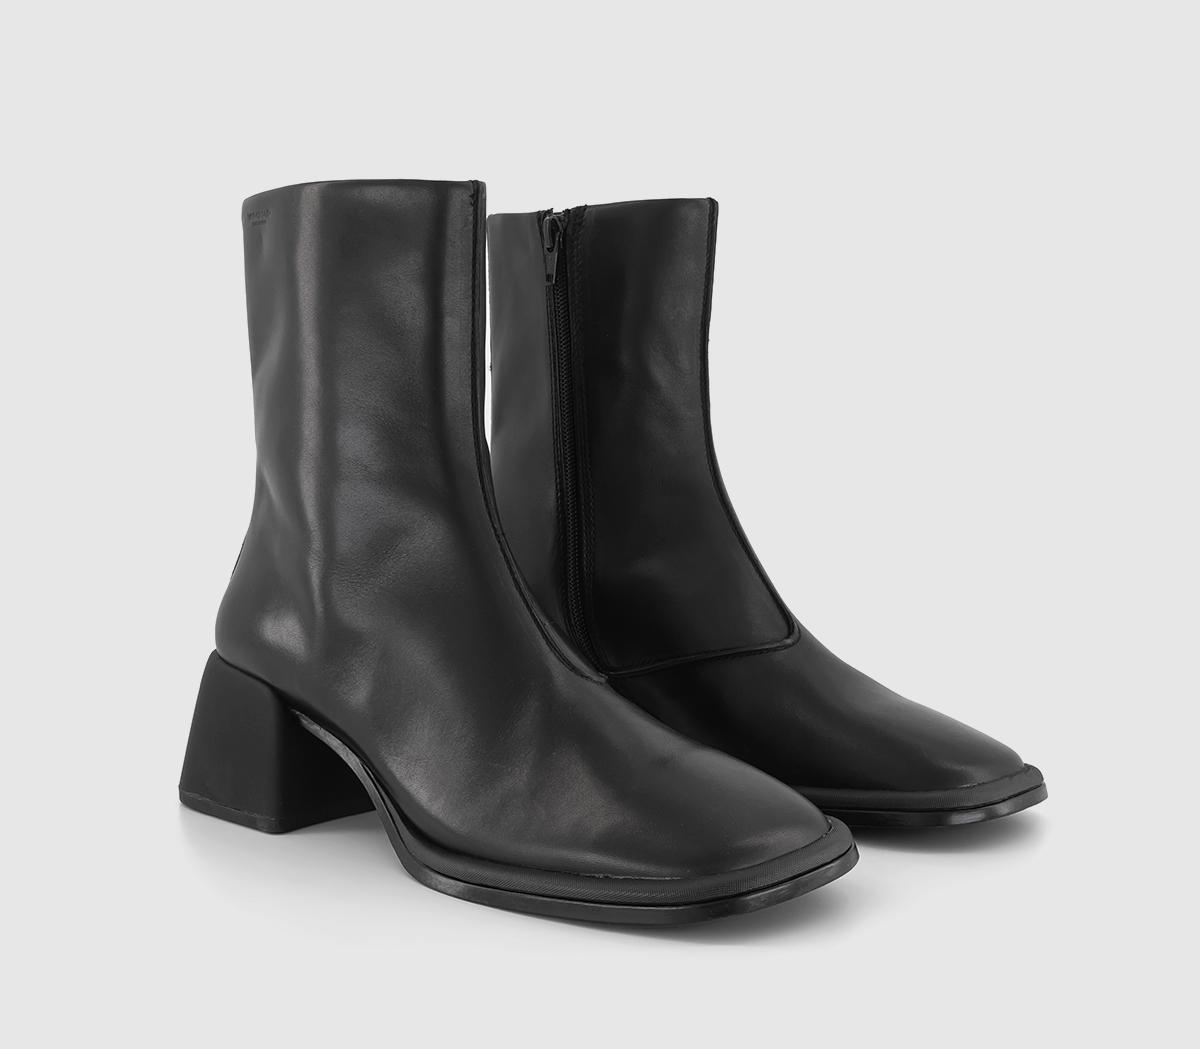 Vagabond Shoemakers Ansie Ankle Boots Black - Women's Ankle Boots